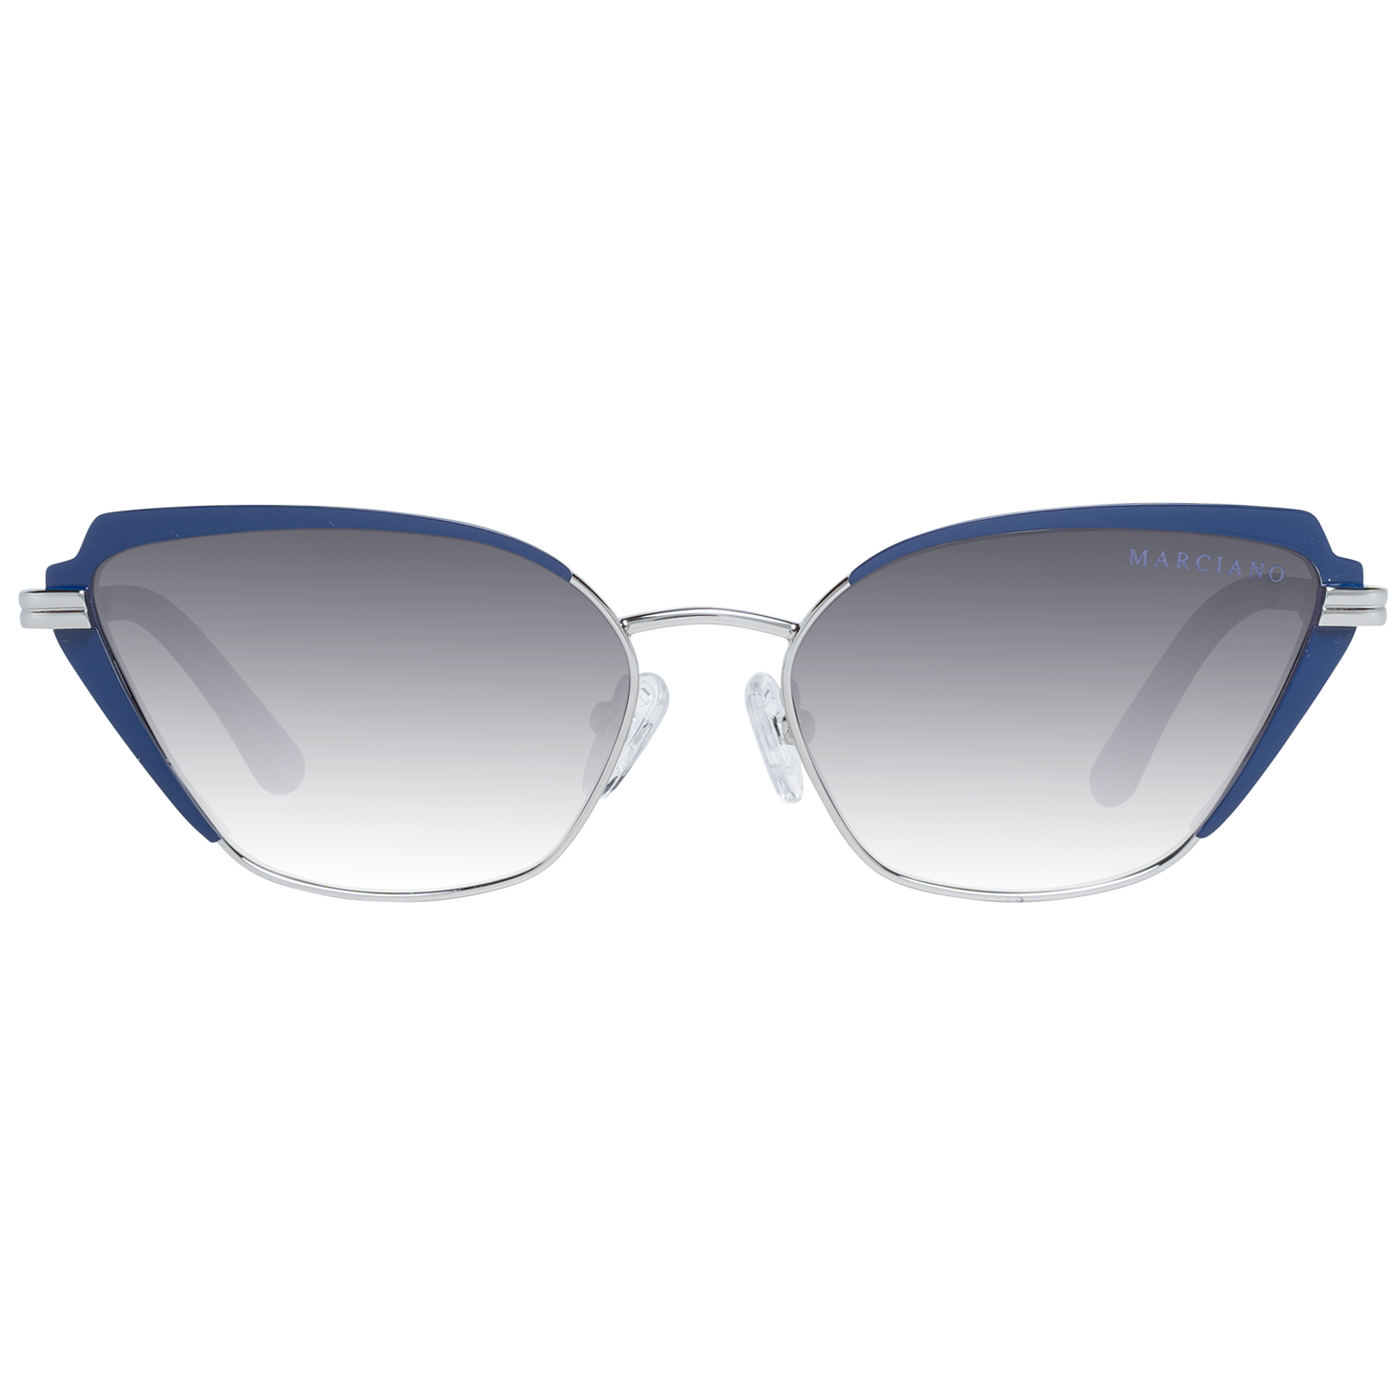 Marciano by Guess Blue Women Sunglasses